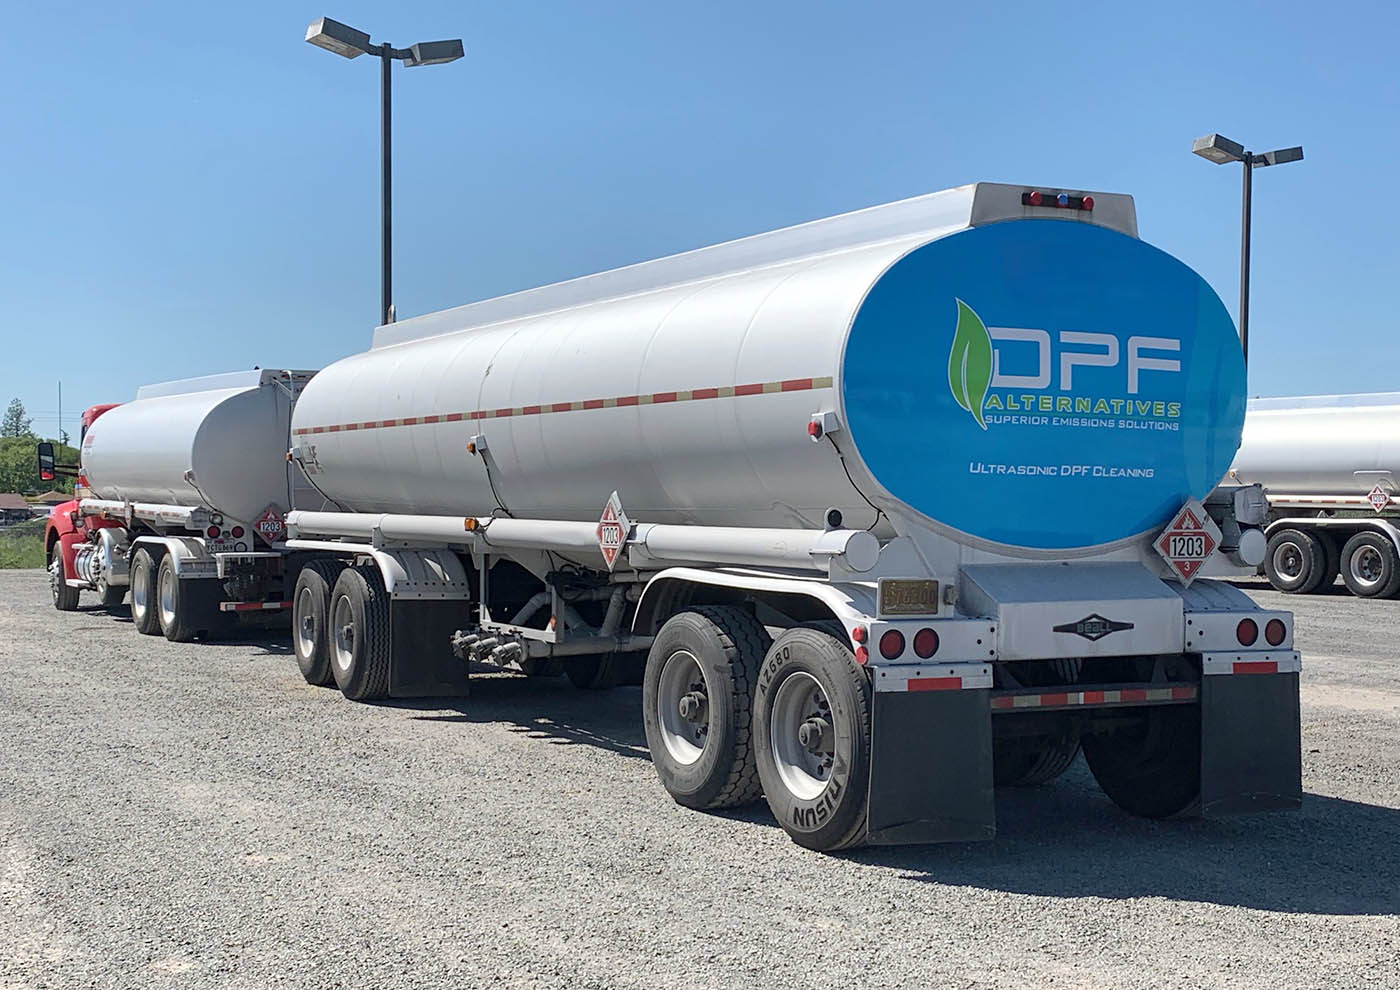 Back of a clean, large, reflective semi truck rig, contact DPF Alternatives for a DPF cleaning in Canyon, TX.